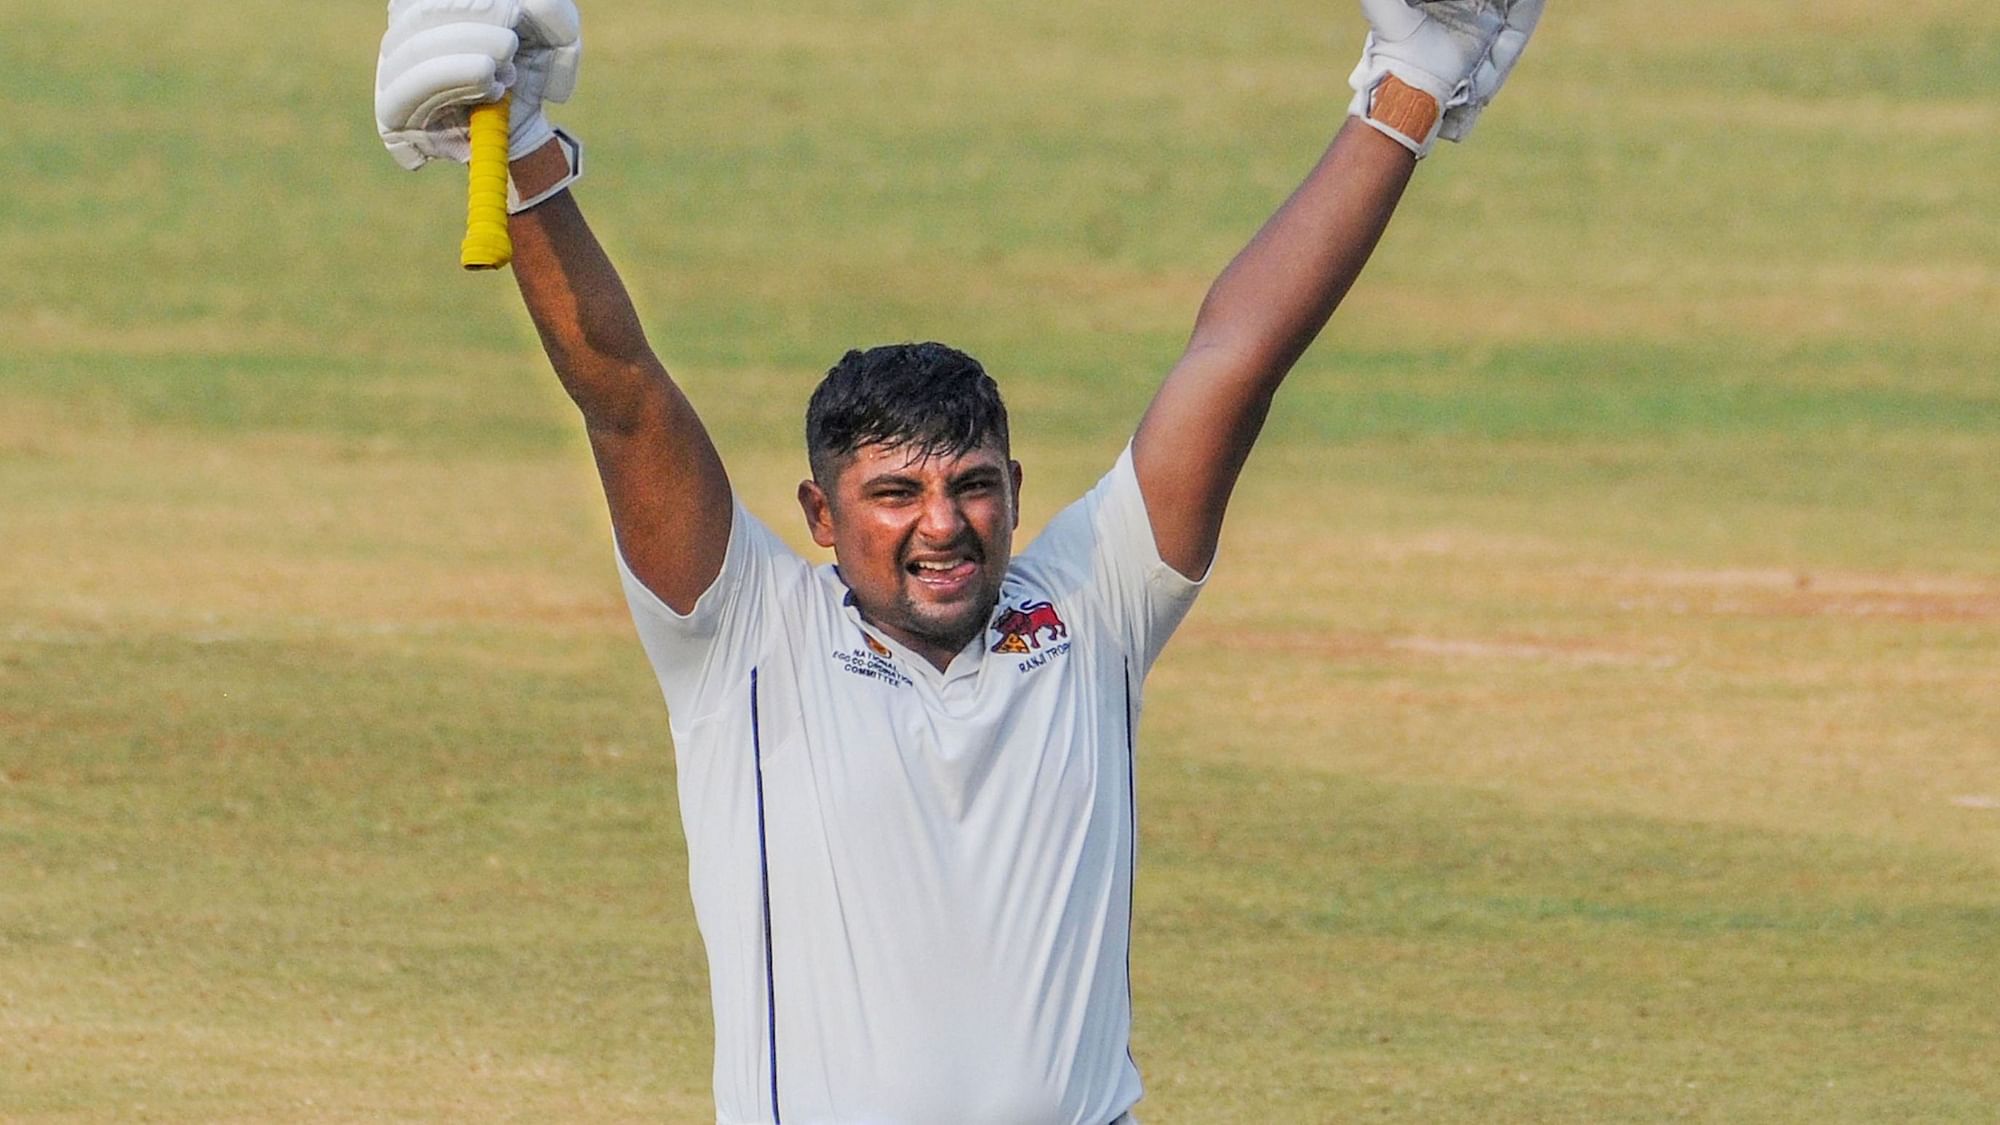 Sarfaraz Khan, whose maiden triple ton helped Mumbai take the first-innings lead against Uttar Pradesh, believed that he was the kind of player who could change the course of the game.